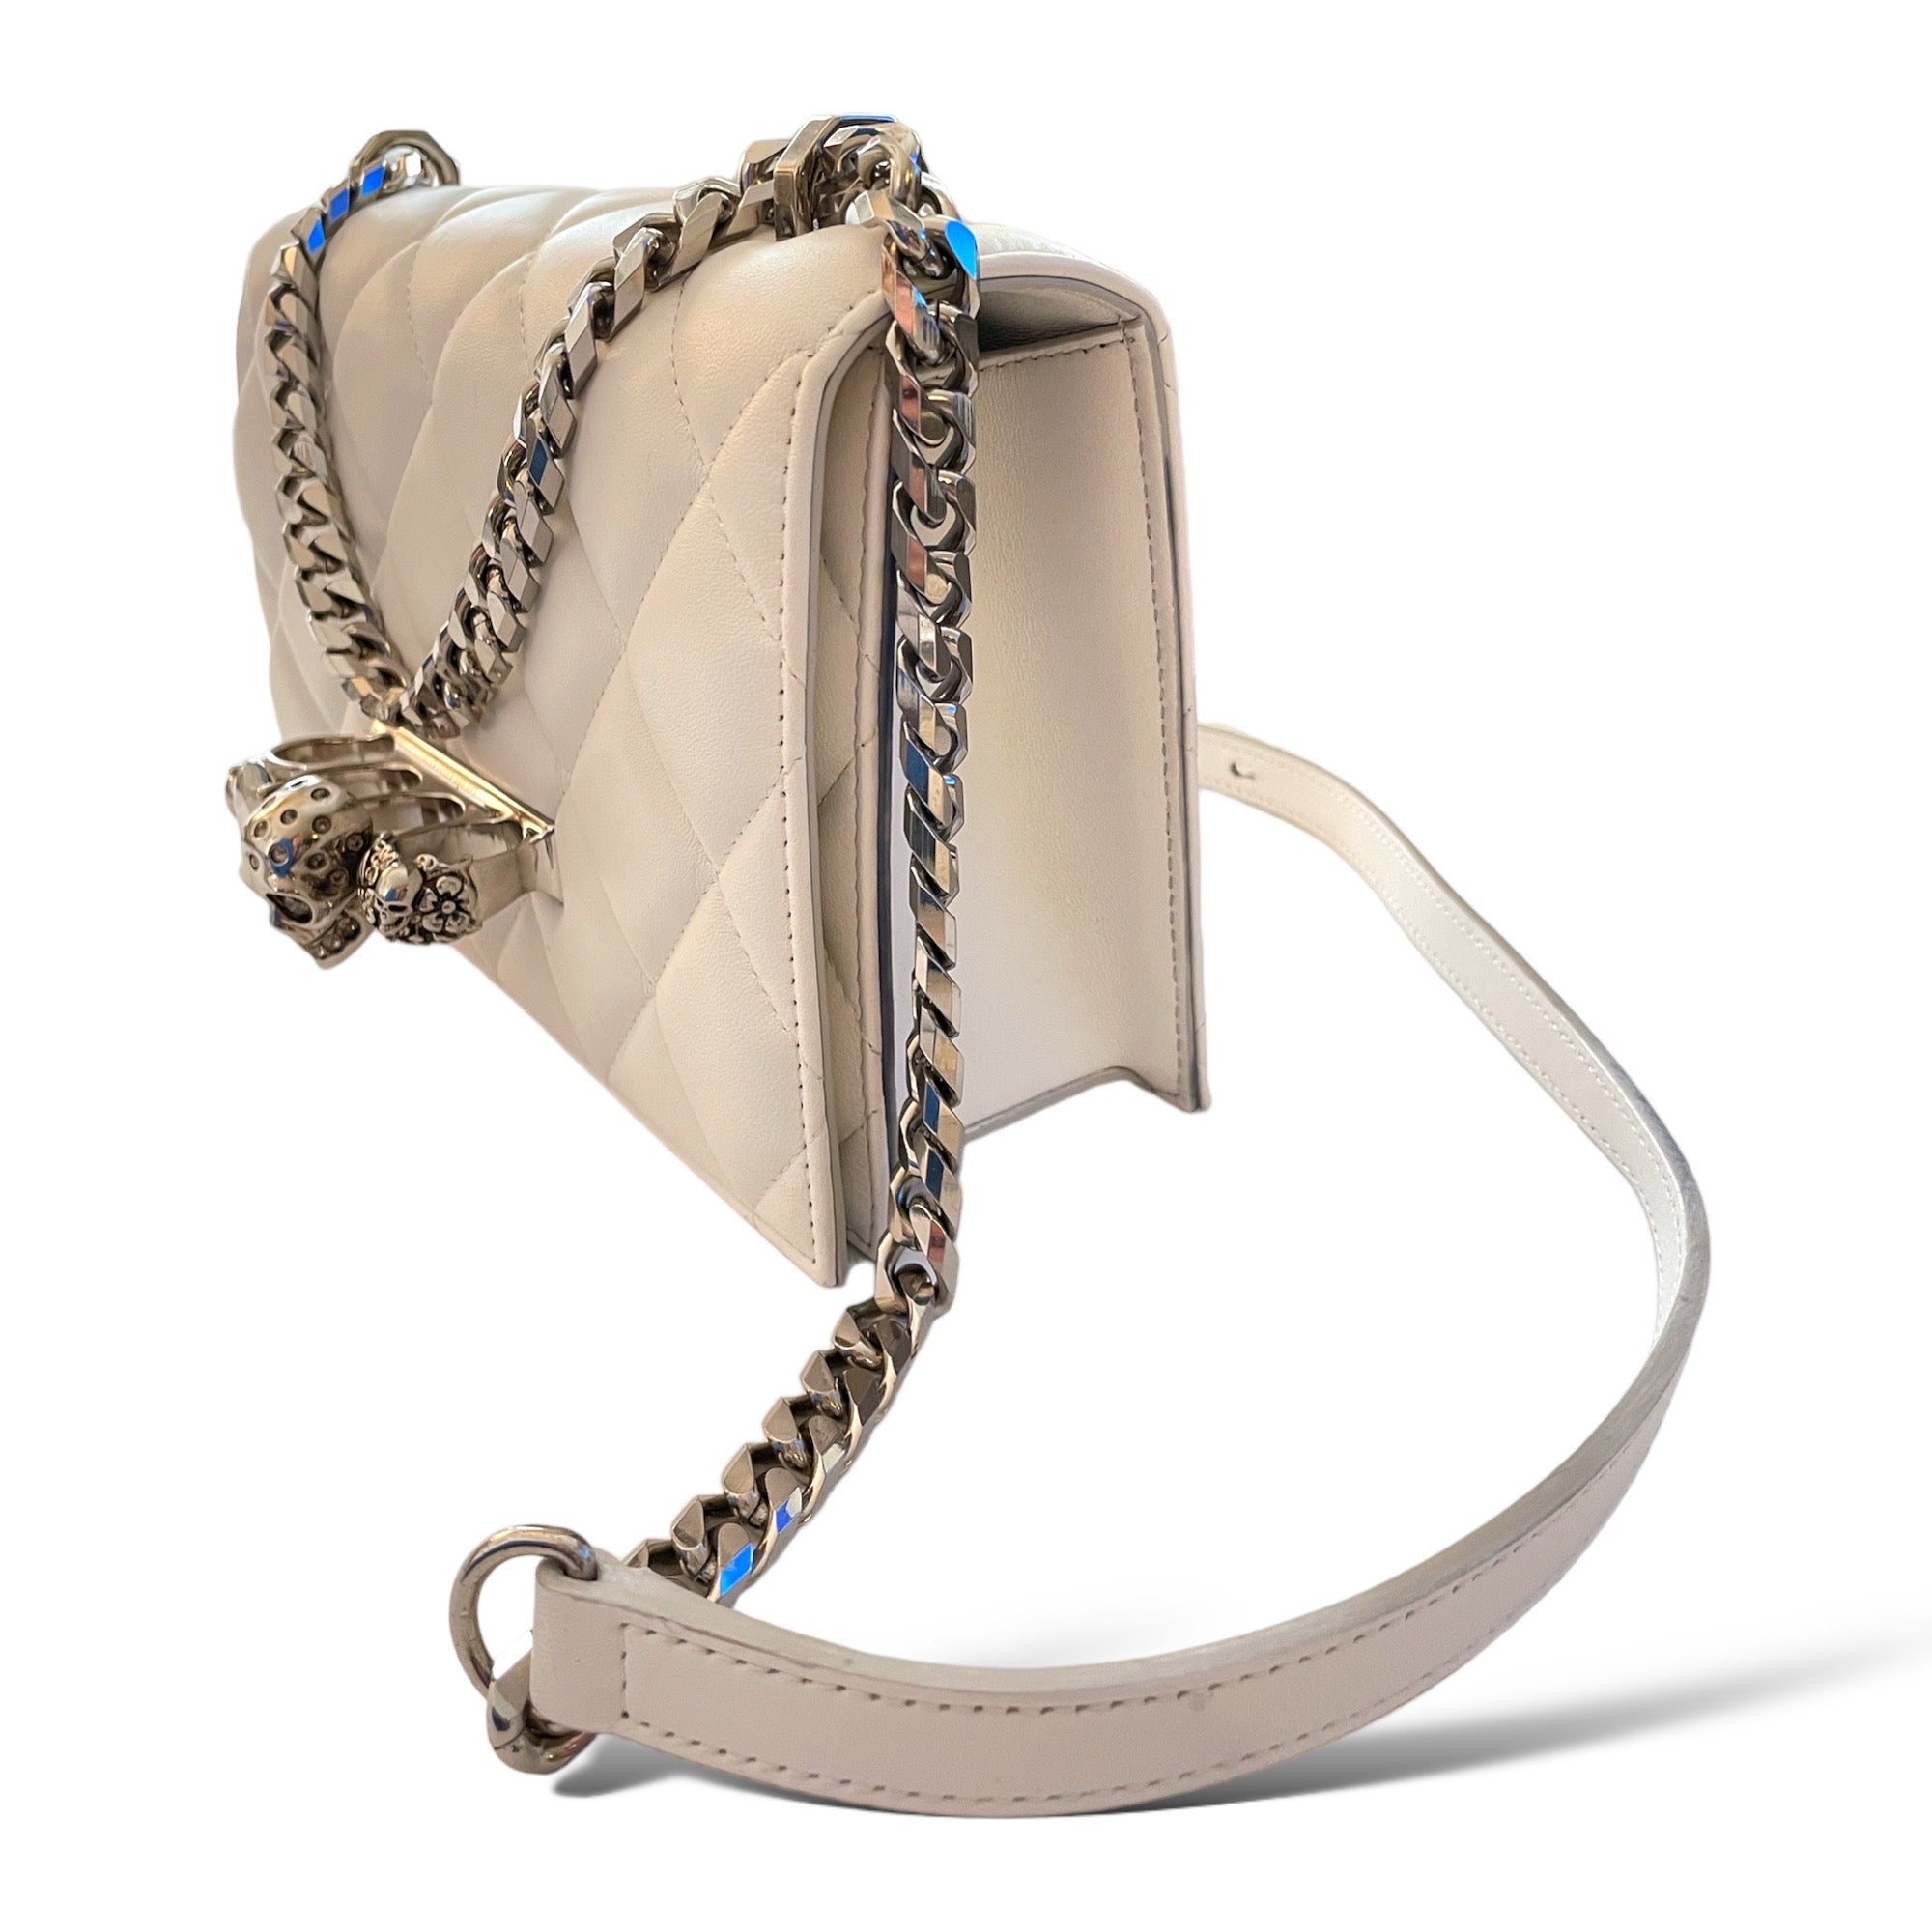 ALEXANDER MCQUEEN White Quilted Leather Jeweled Knuckle Shoulder Bag